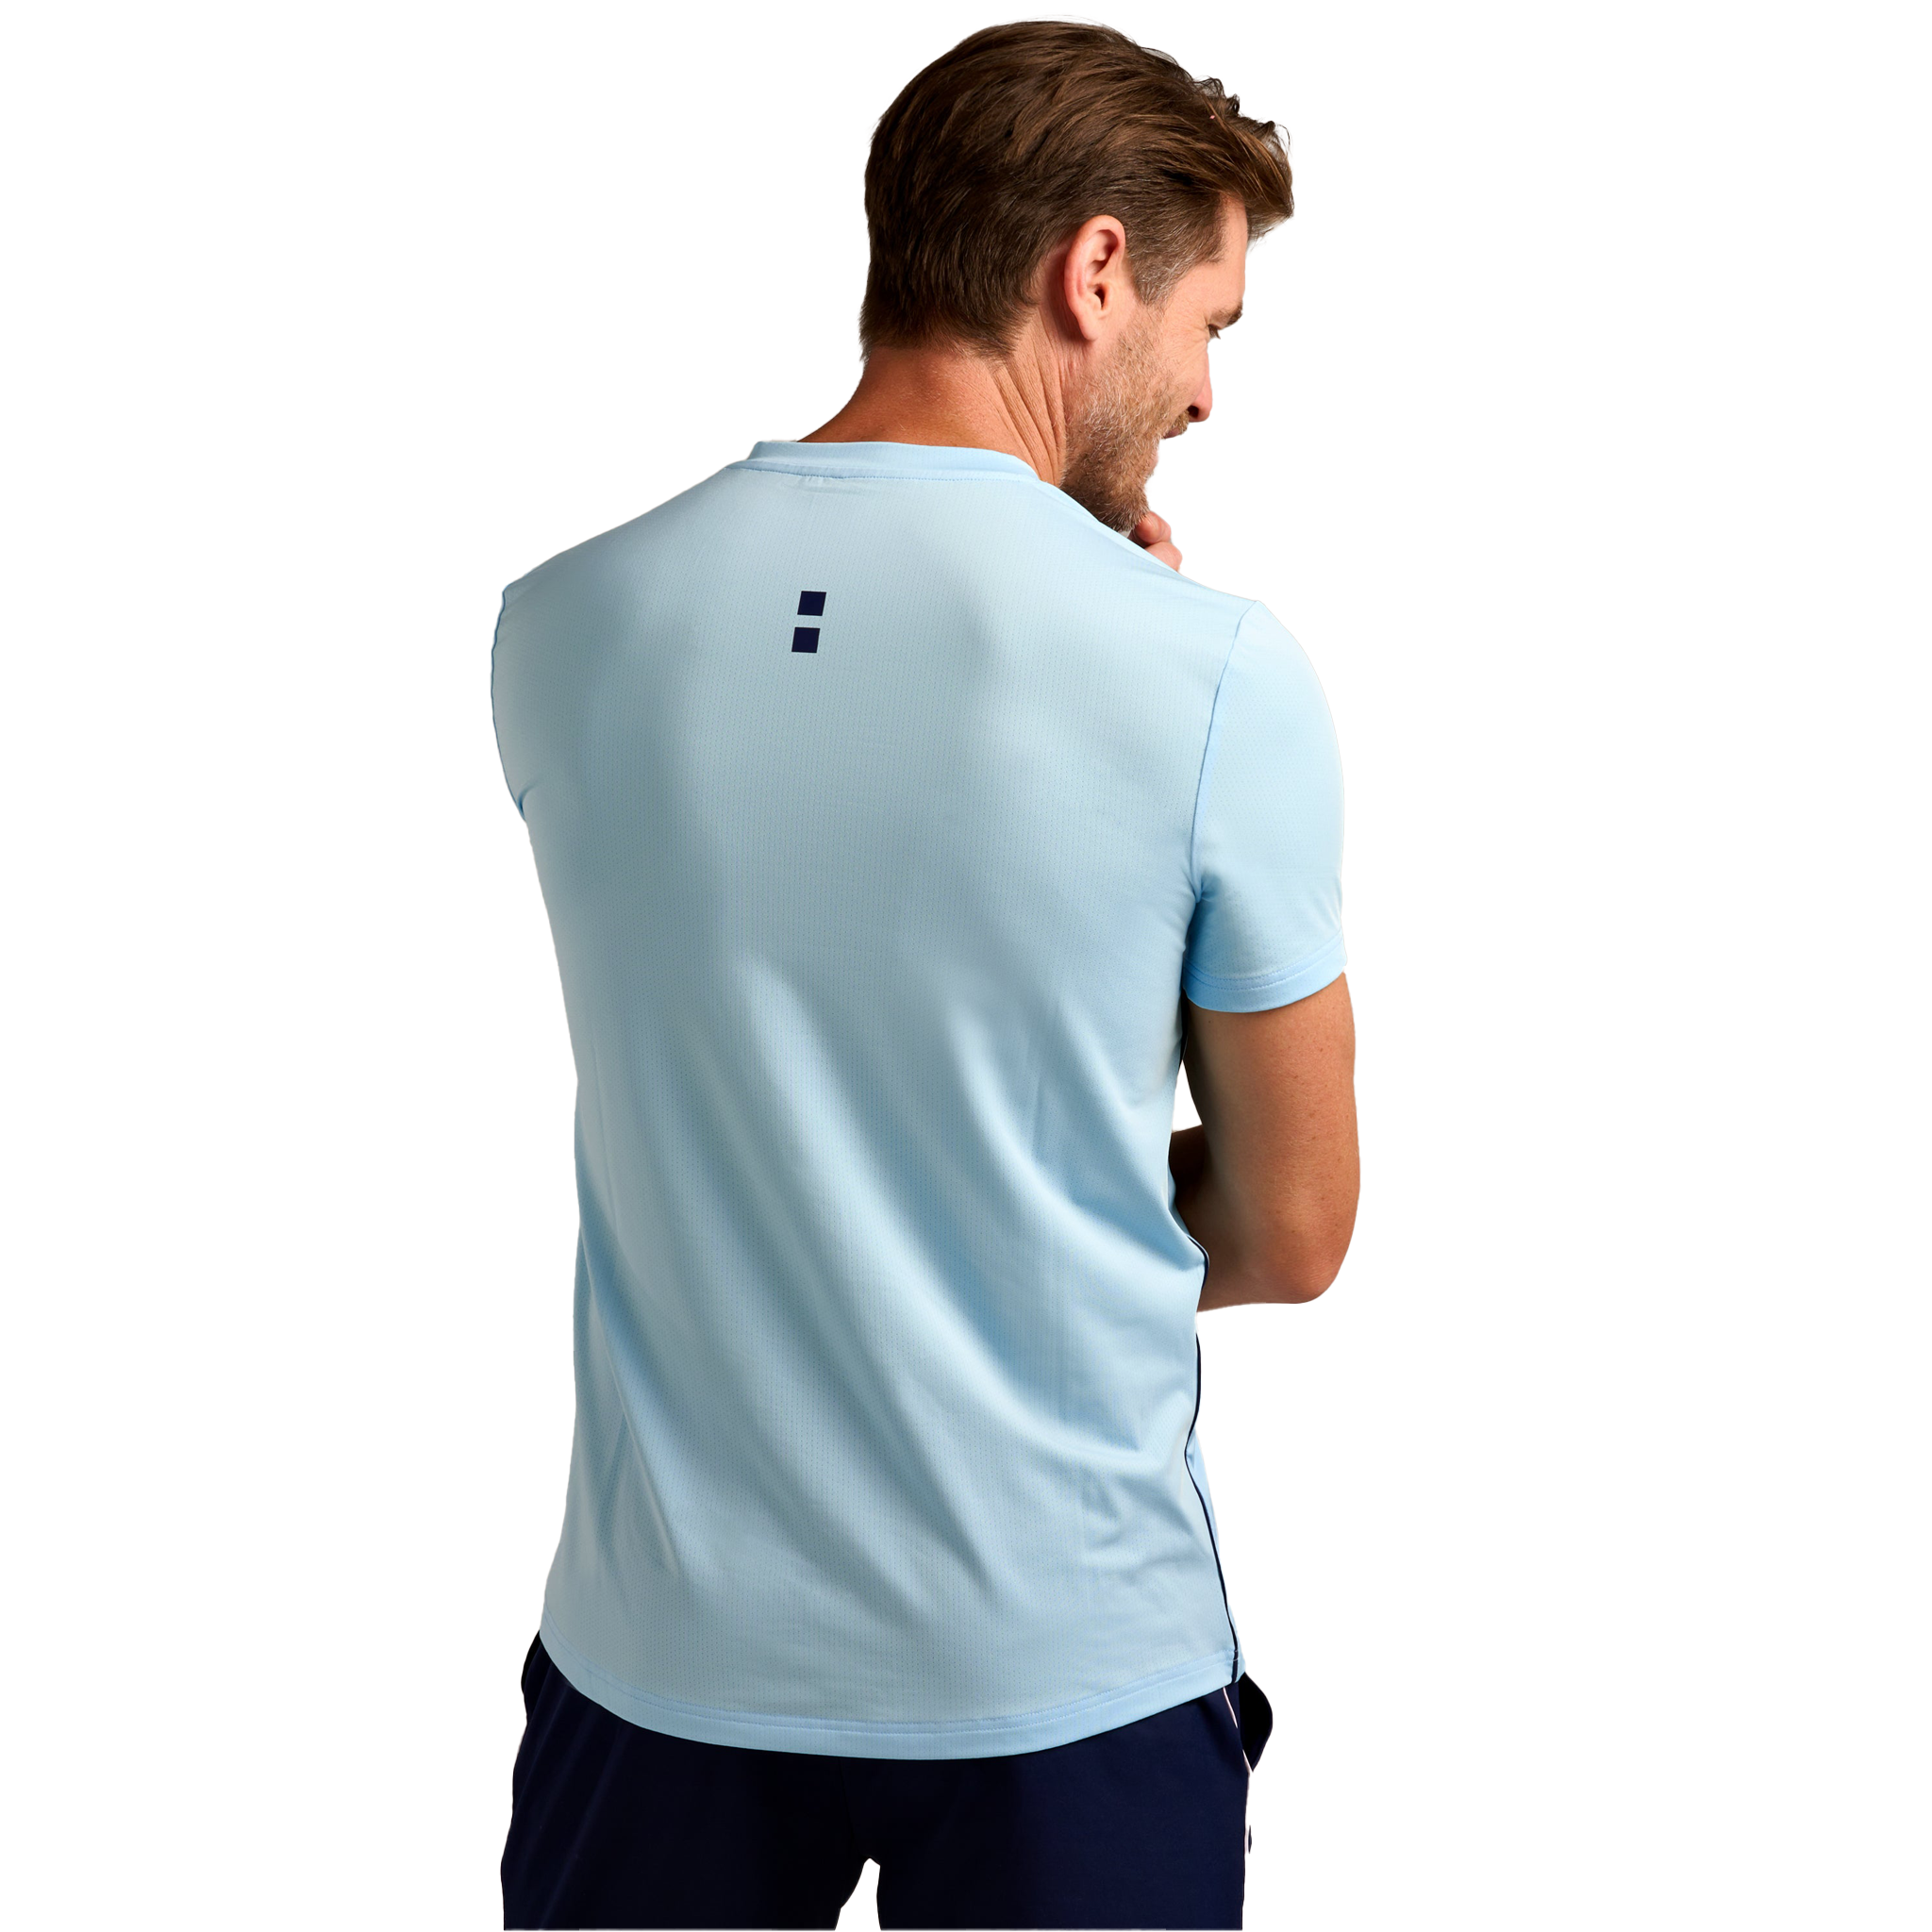 nordicdots Performance V-Tee Cooling Blue